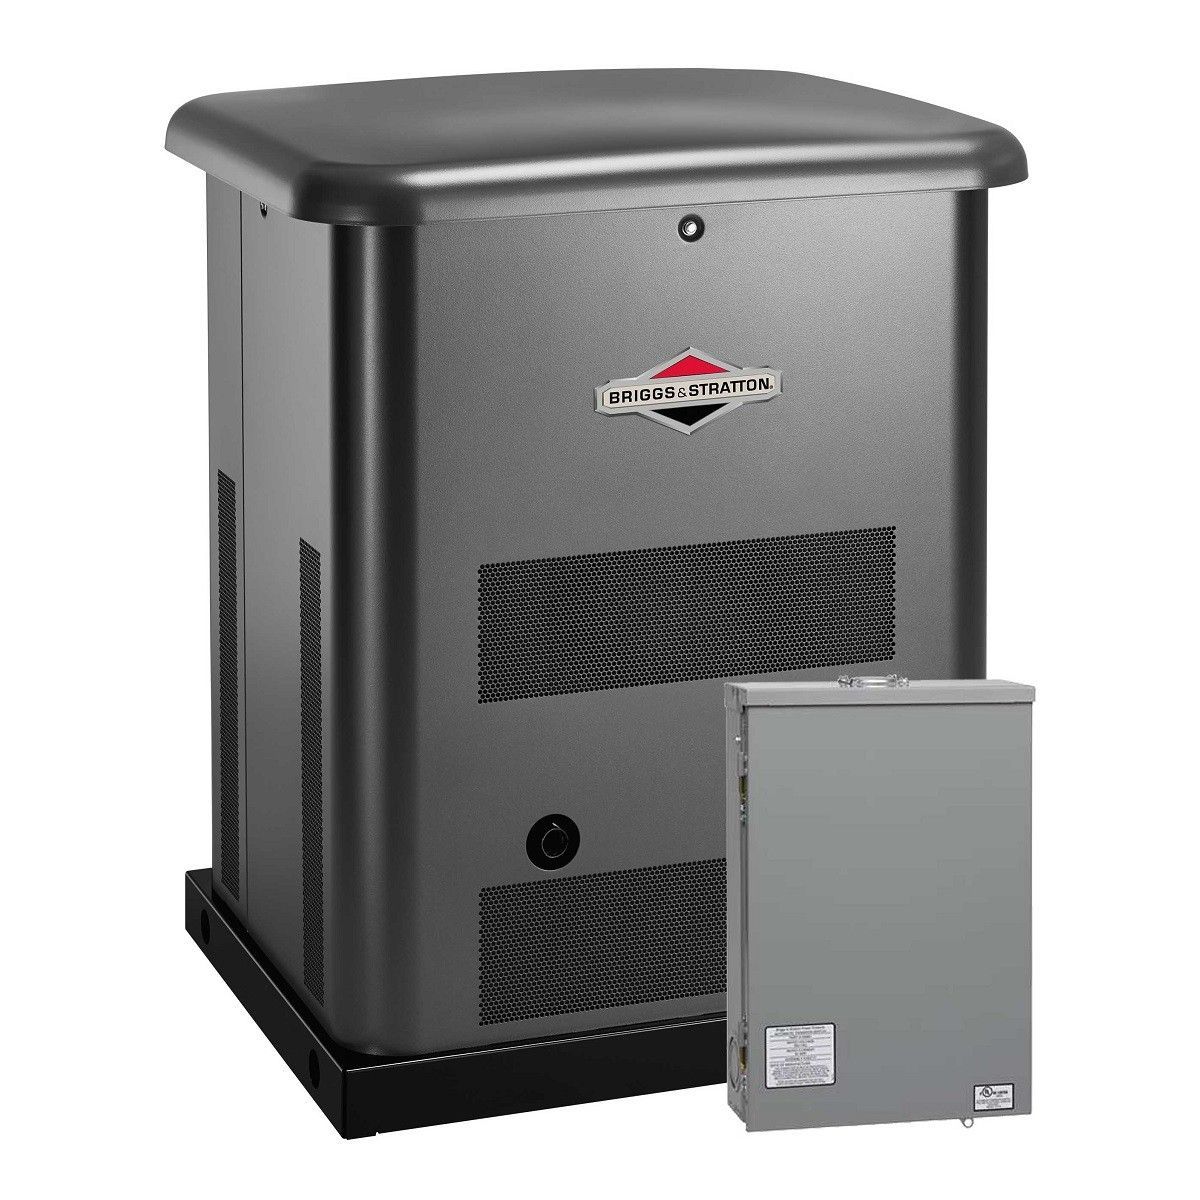 Briggs & Stratton 10kW Standby Generator – Backup Power for Medium Sized Homes